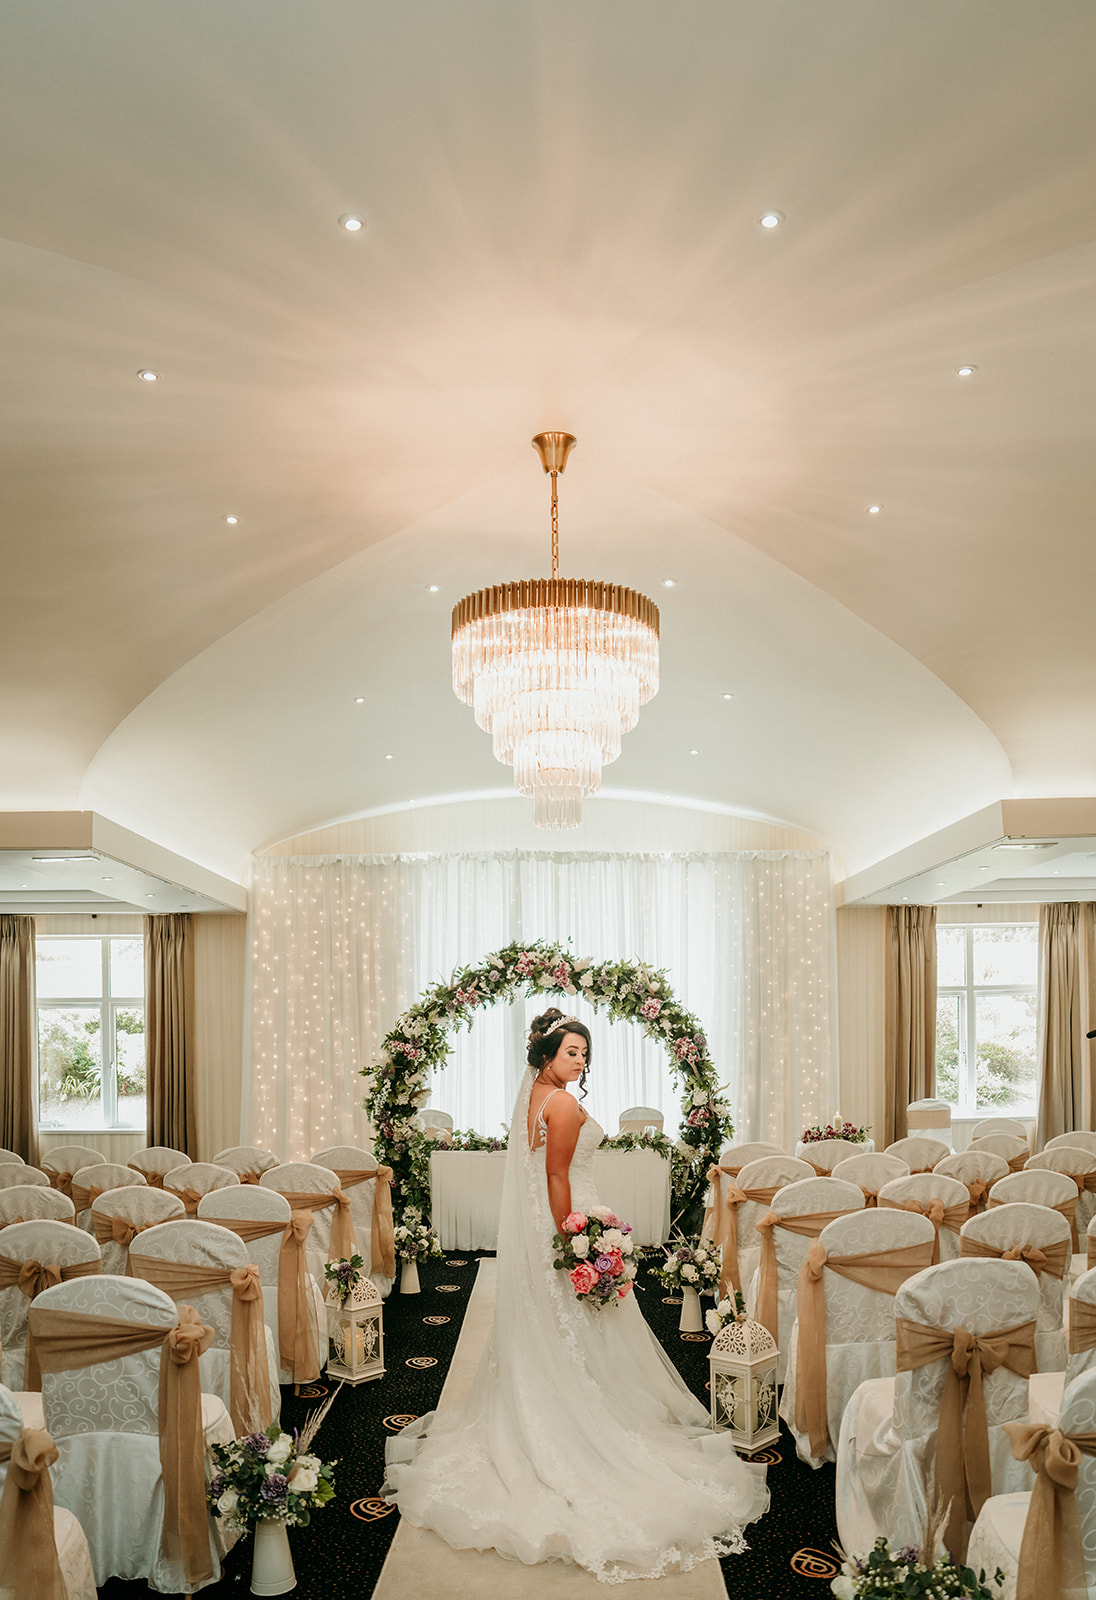 Shandon Hotel brides in donegal